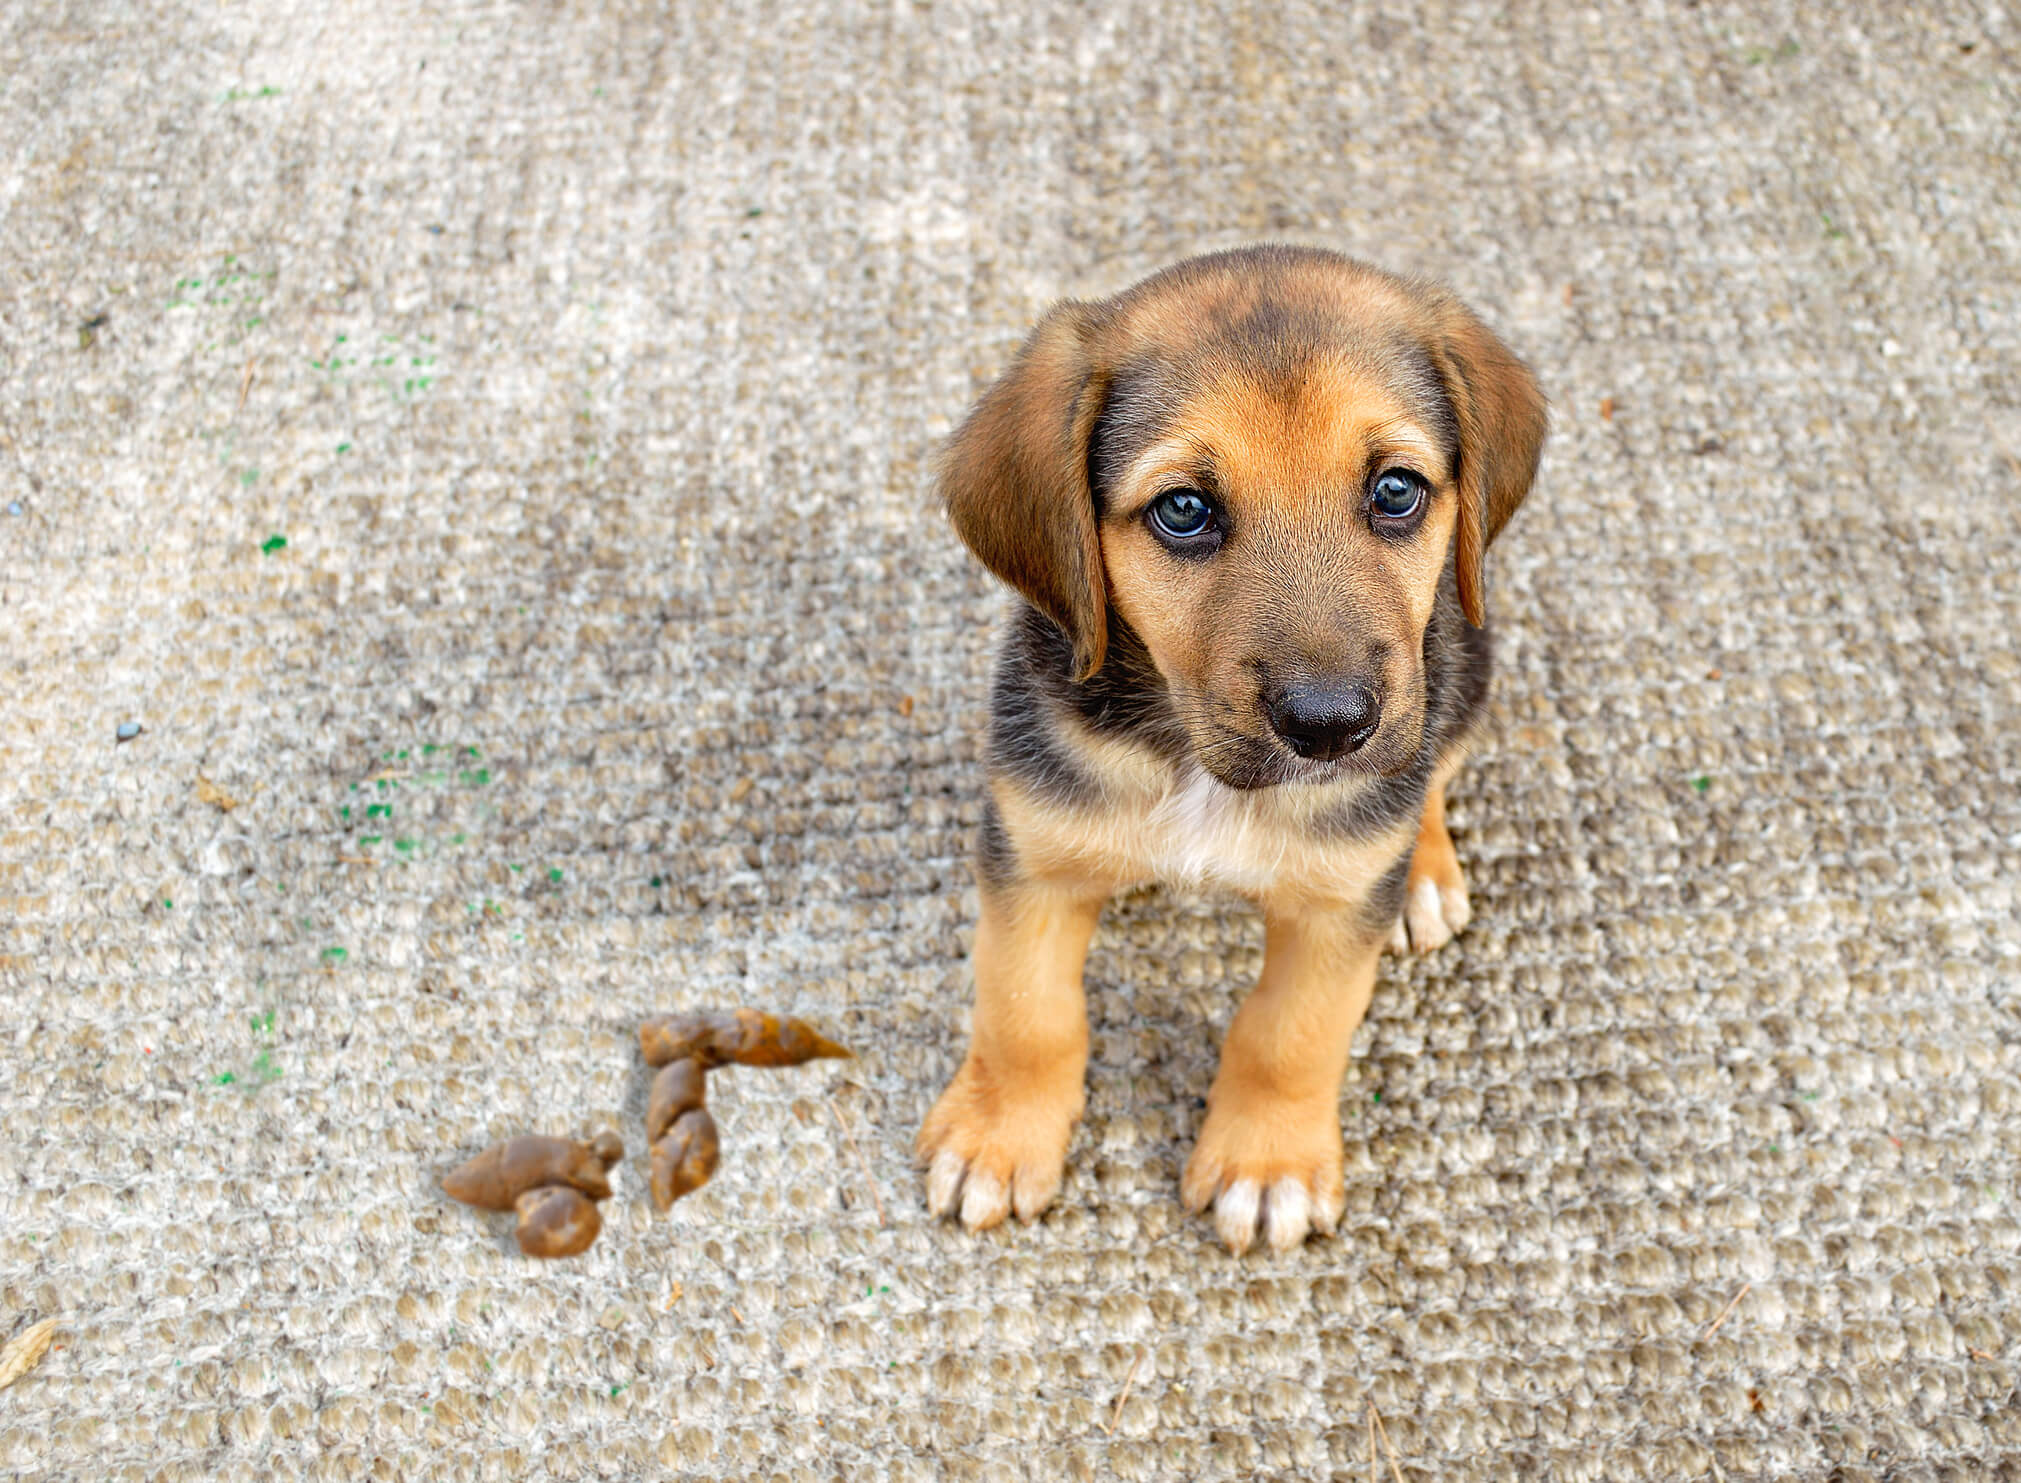 How to Punish Dogs for Pooping in House: Effective Training Tips